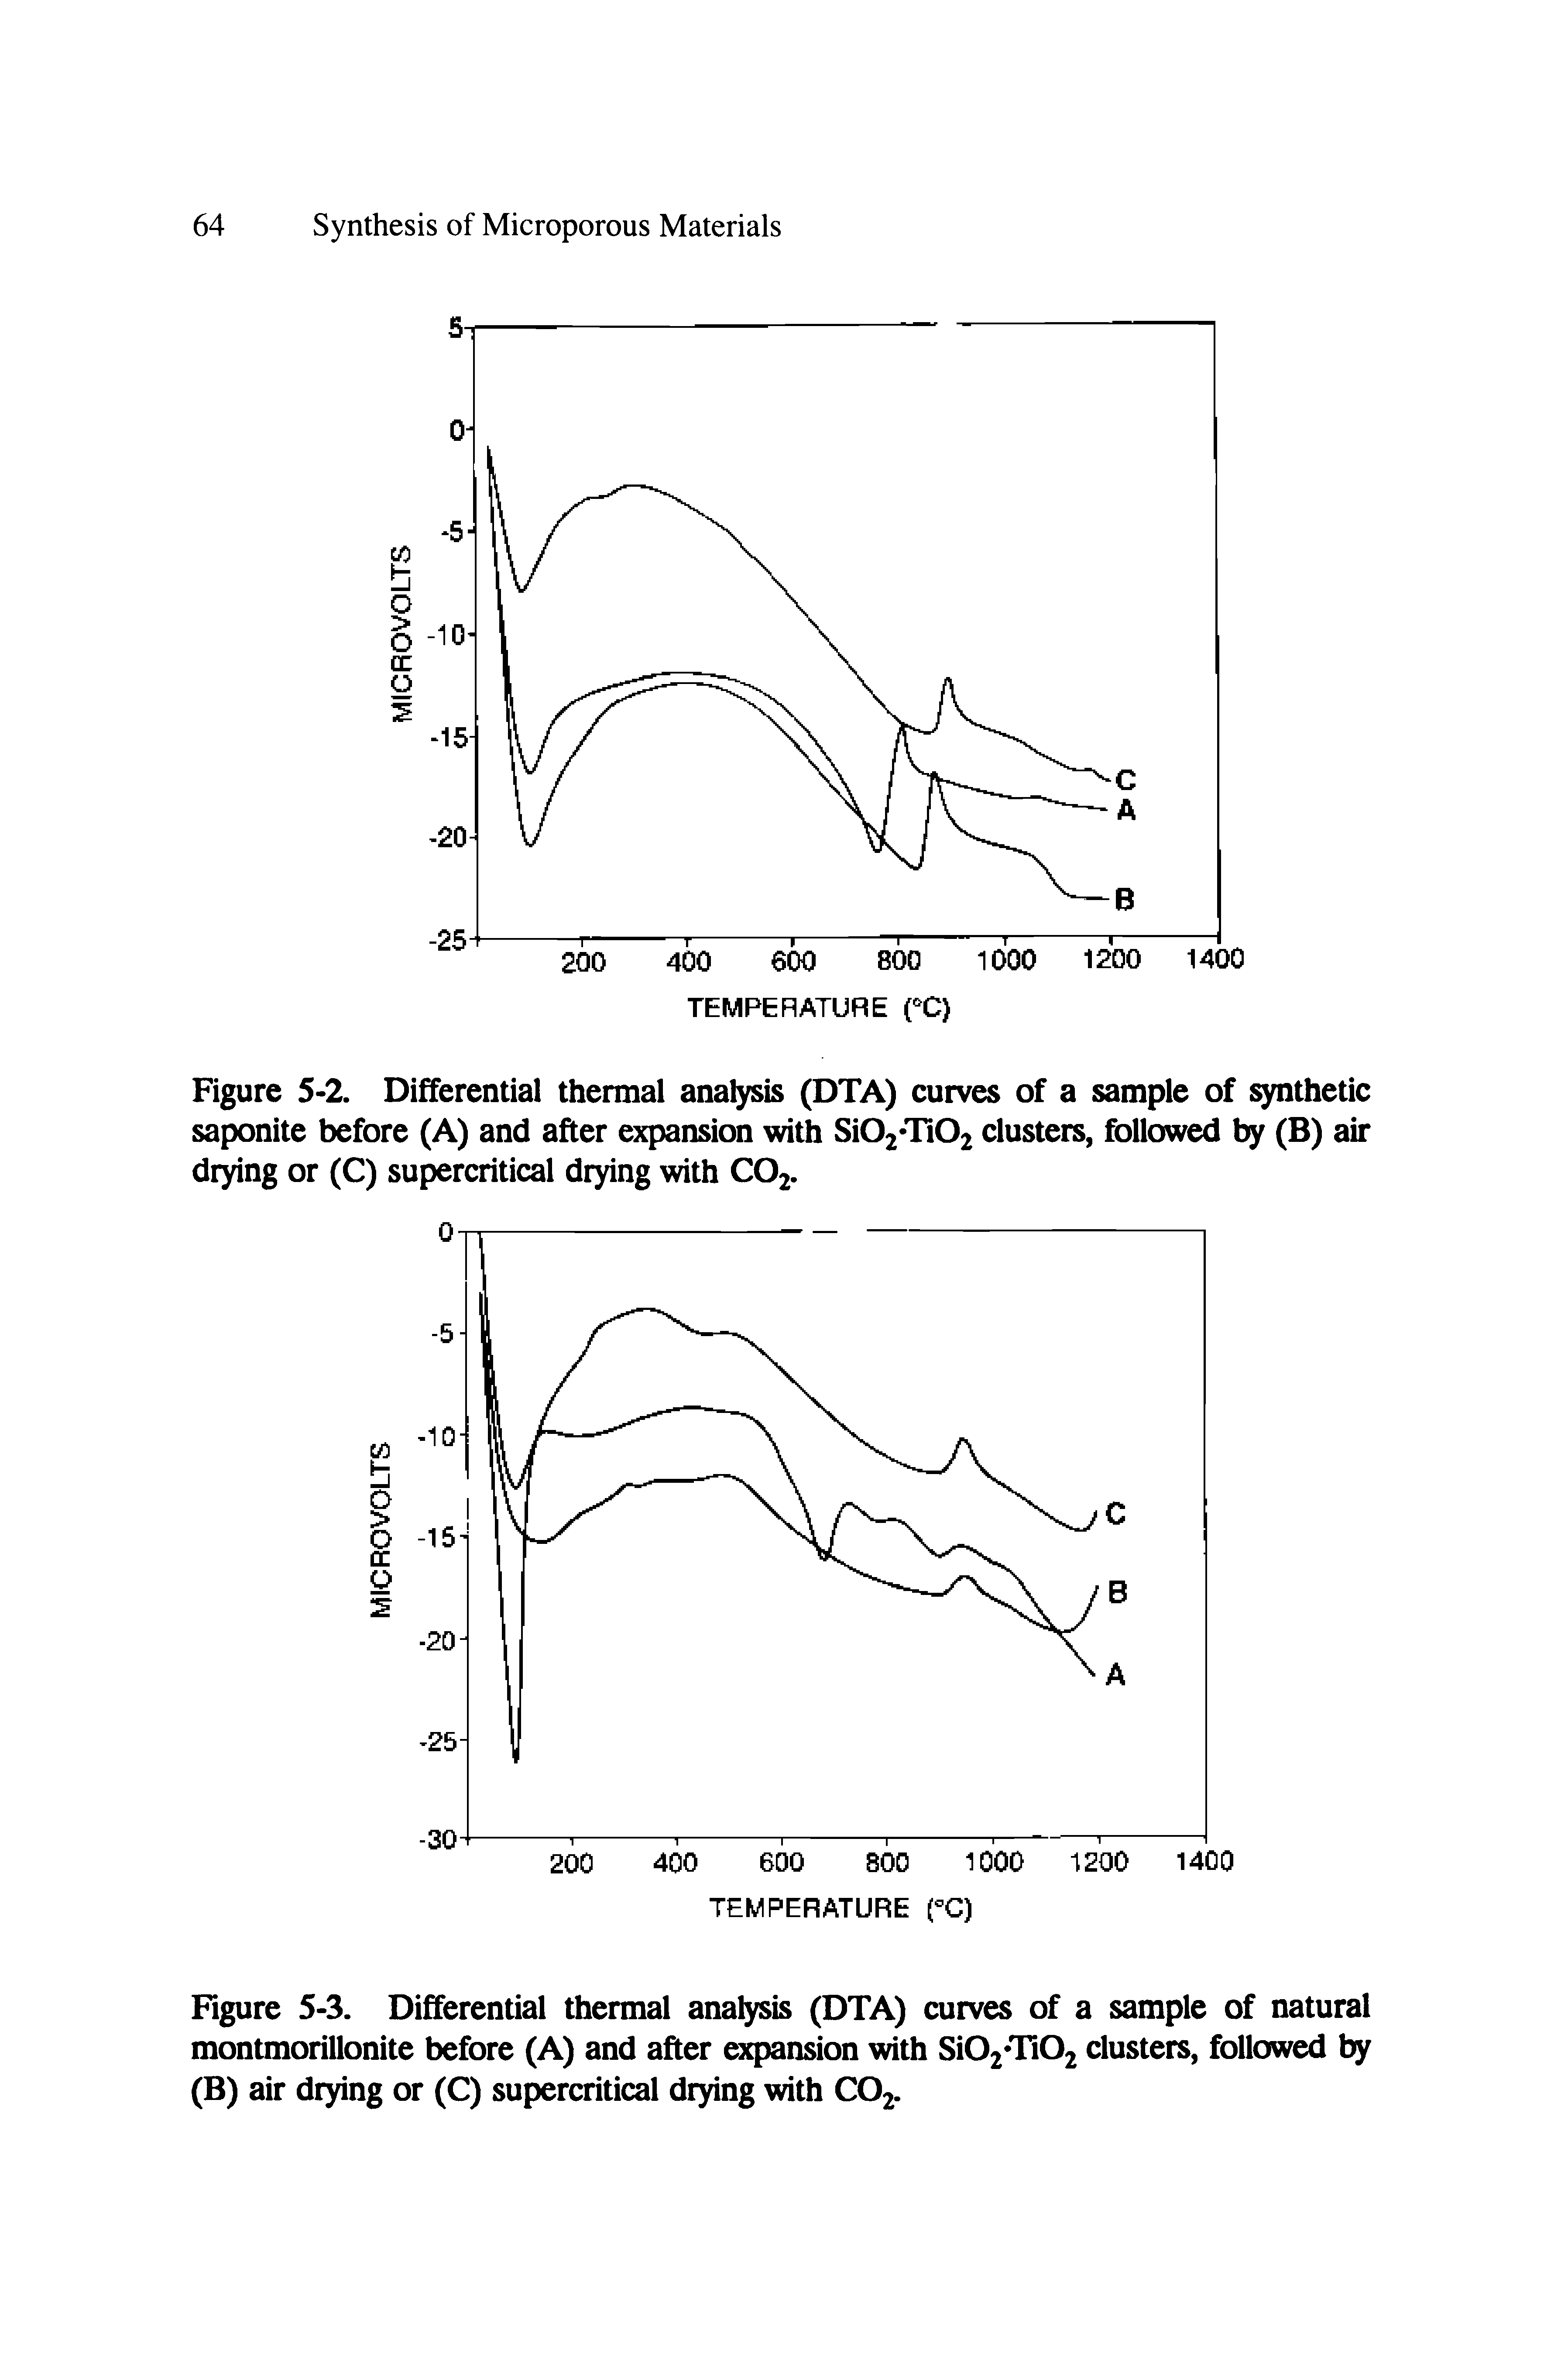 Figure 5-2. Differential thermal analysis (DTA) curves of a sample of thetic saponite before (A) and after expansion with Si02 Ti02 clusters, followed (B) air drying or (C) supercritical drying with CO2.